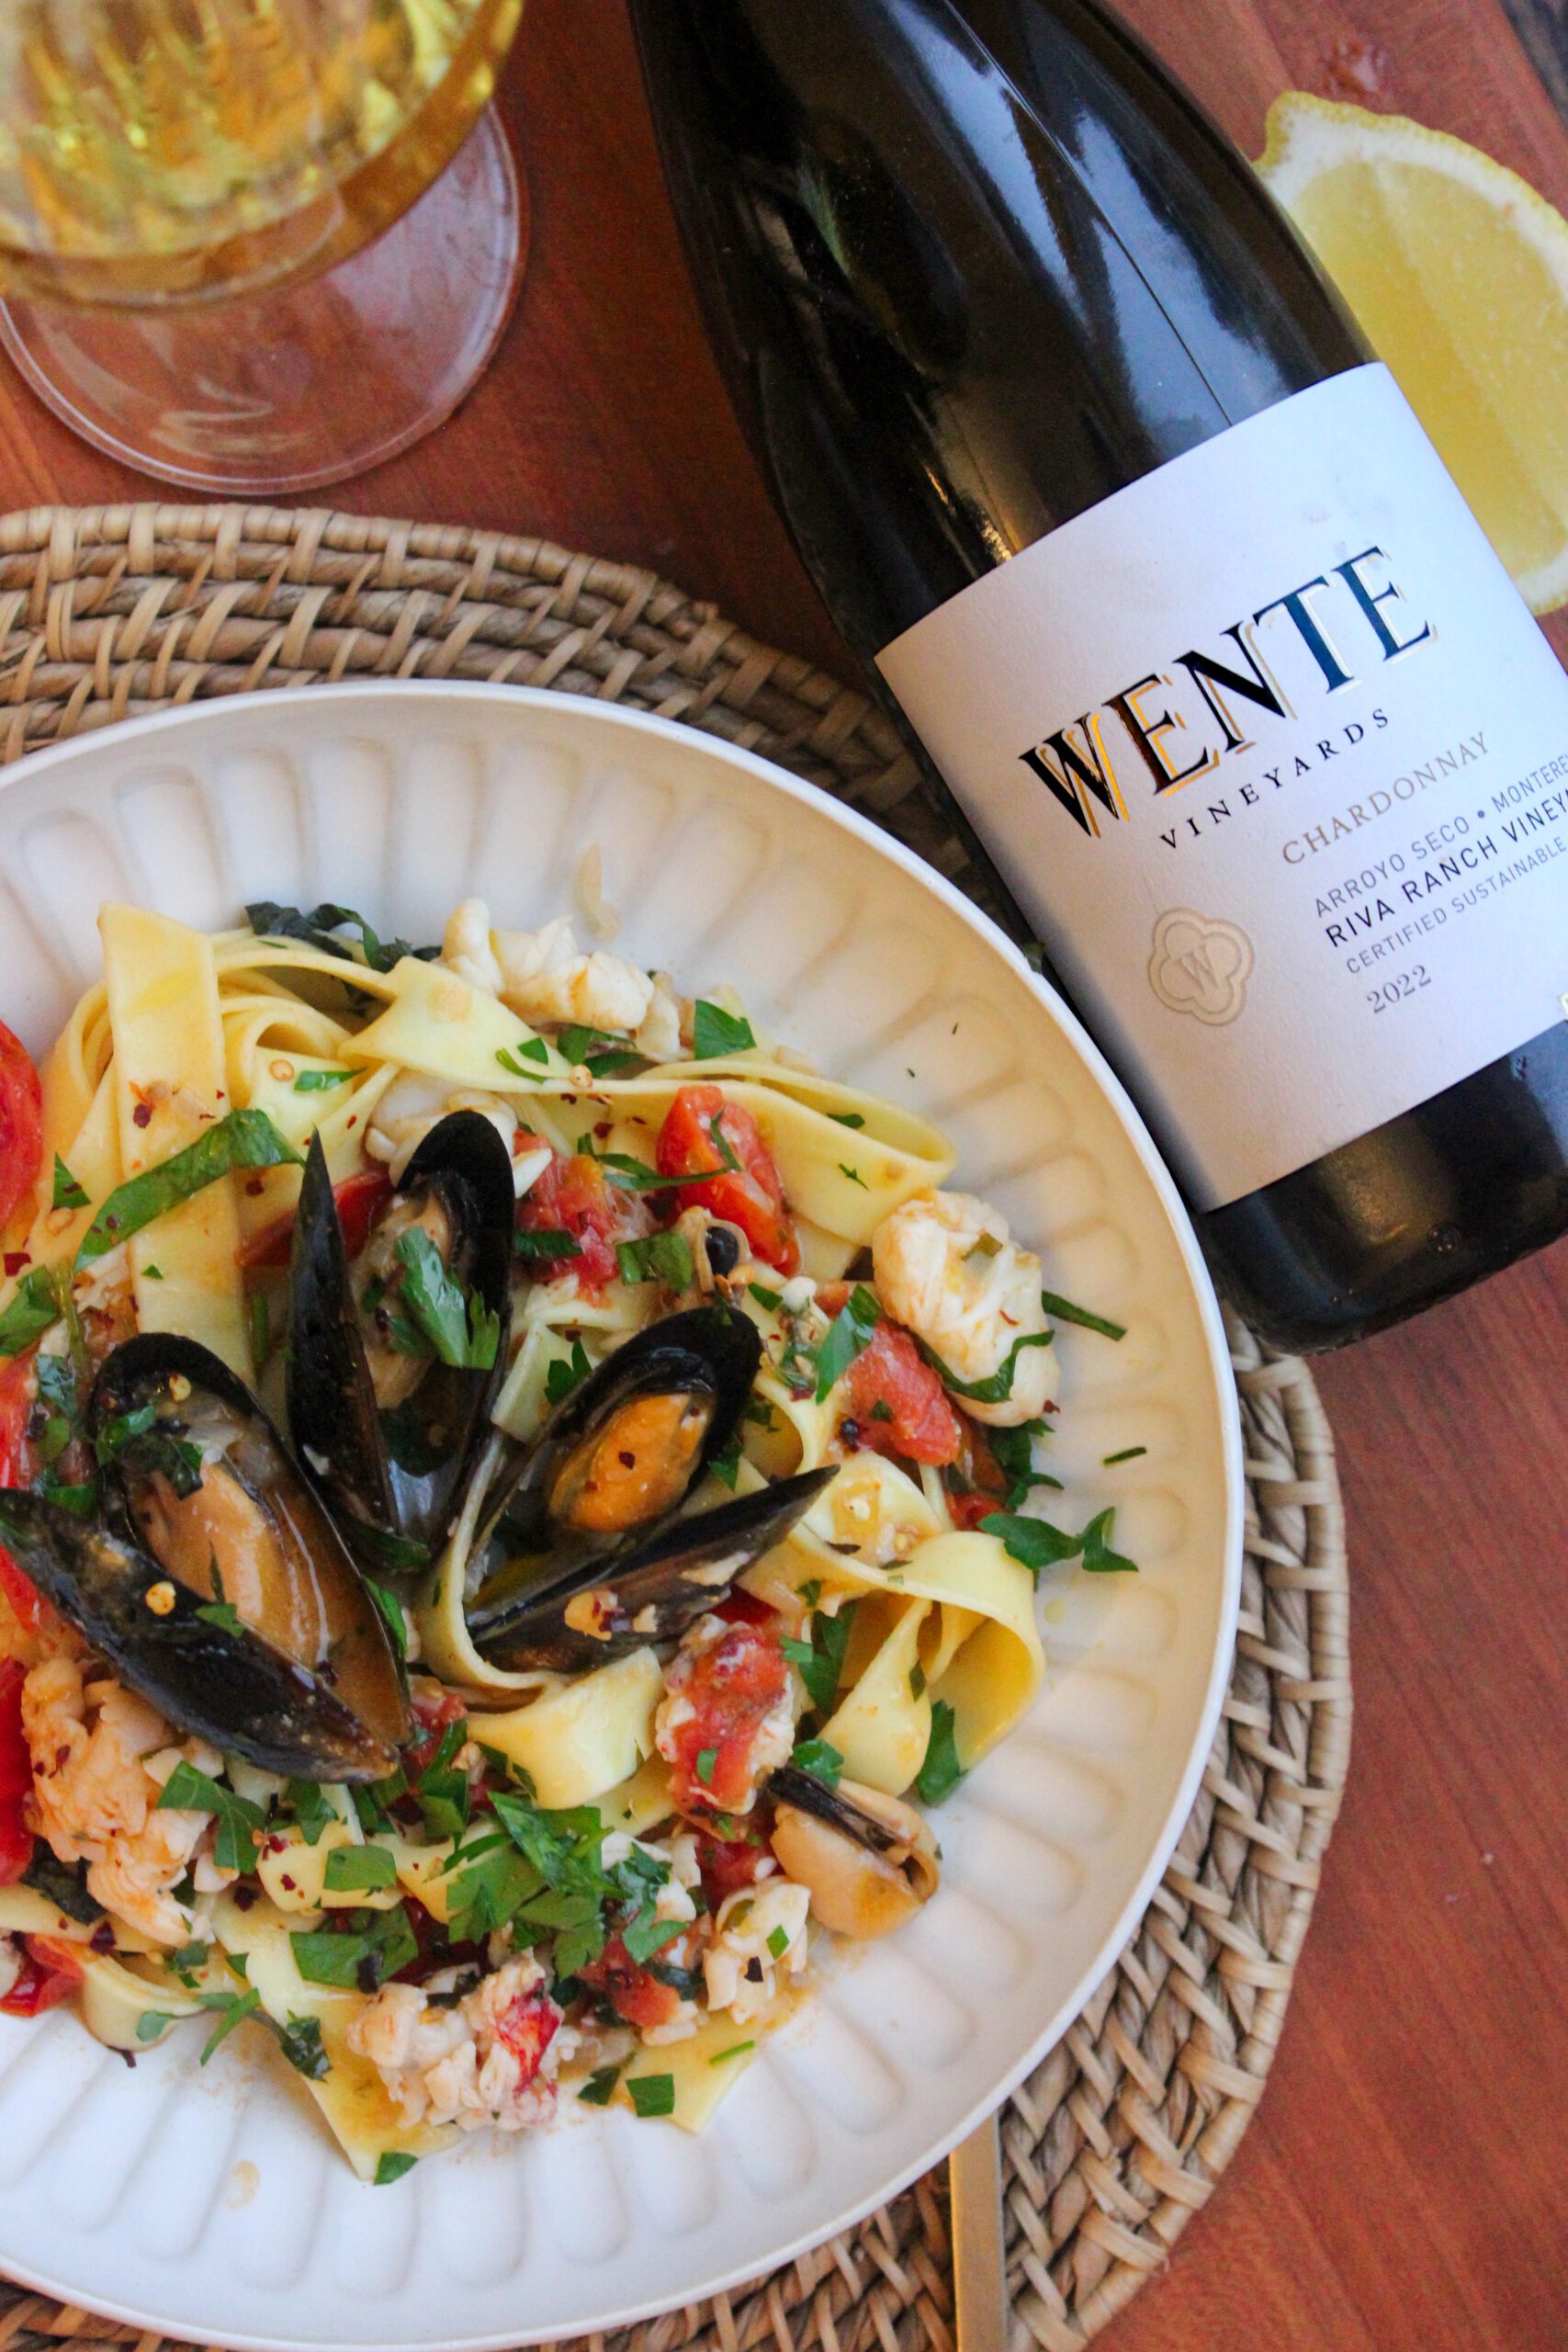 https://wentevineyards.com/wp-content/uploads/2024/01/Lobster-and-Mussels-Pappardelle-with-Wente-Vineyards-Riva-Ranch-Chardonnay-scaled.jpg